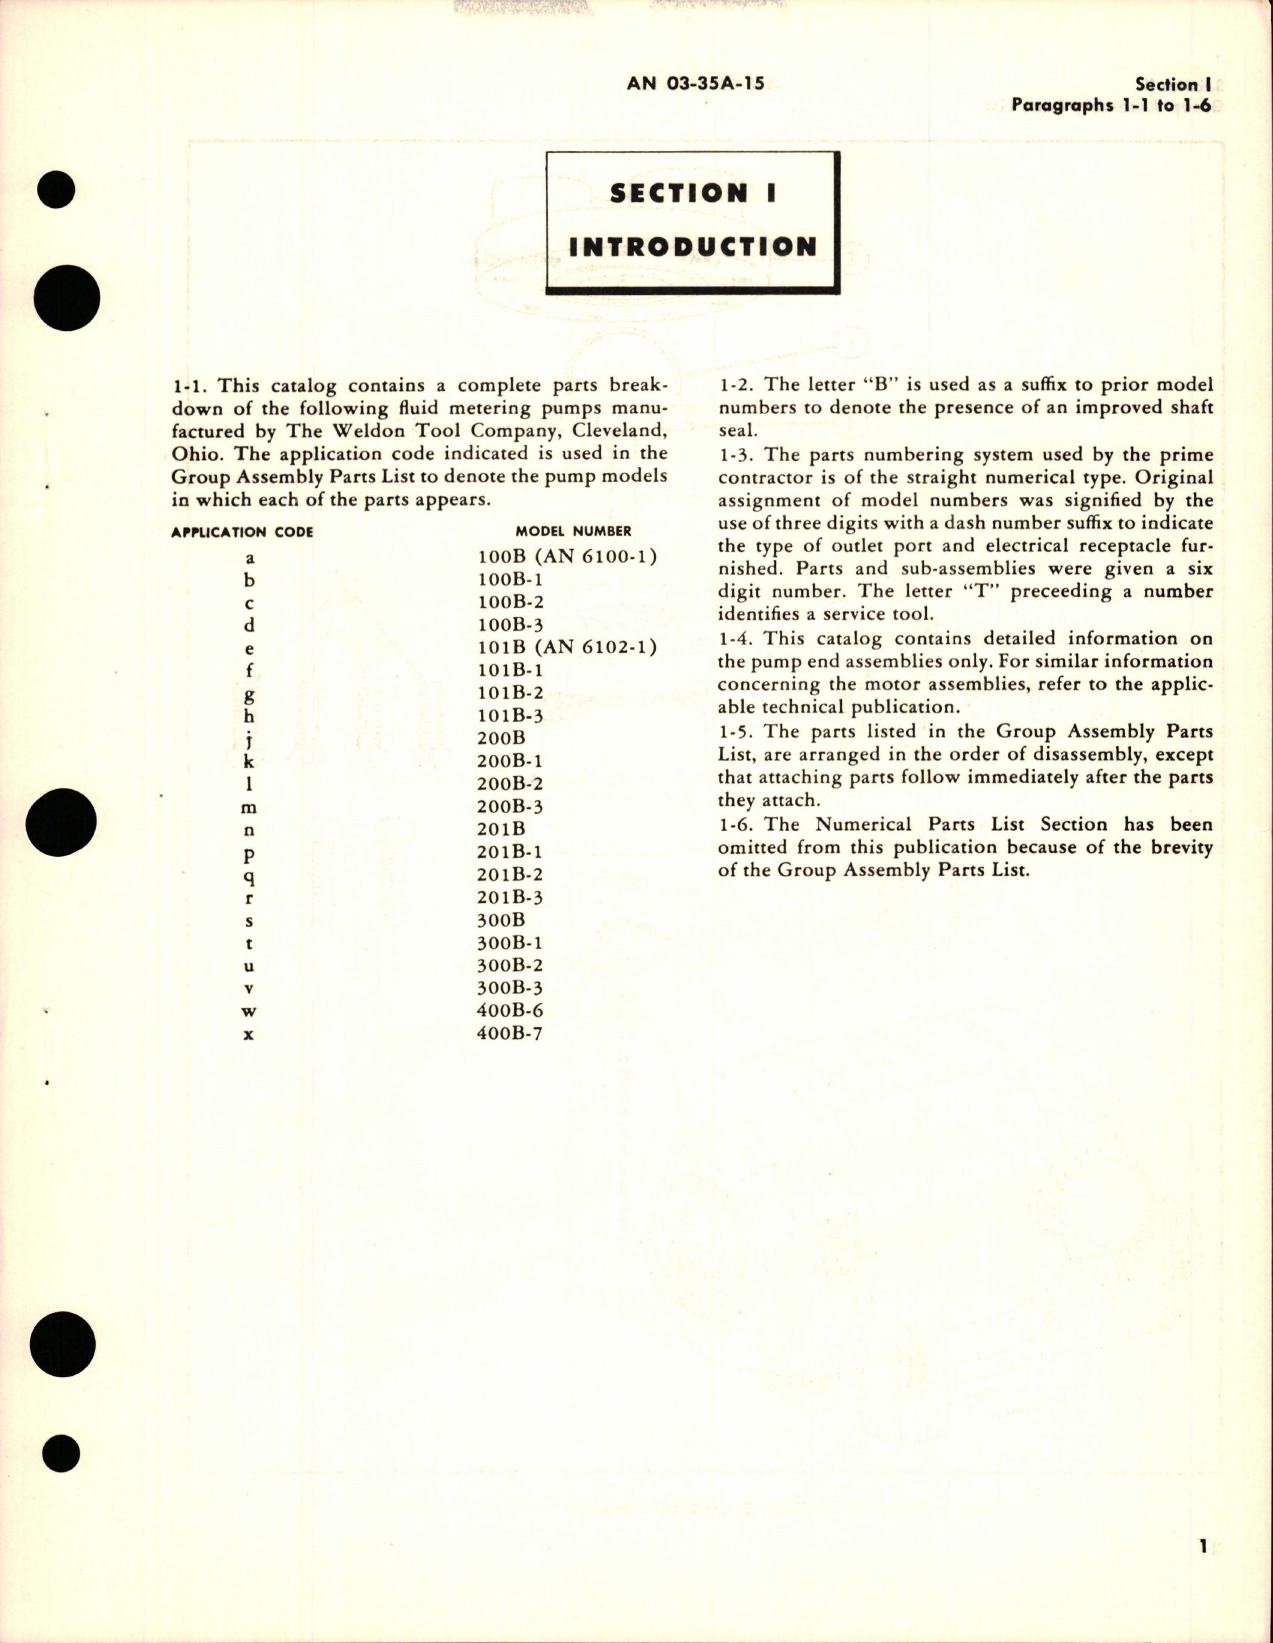 Sample page 5 from AirCorps Library document: Parts Catalog for Anti-Icing Pumps